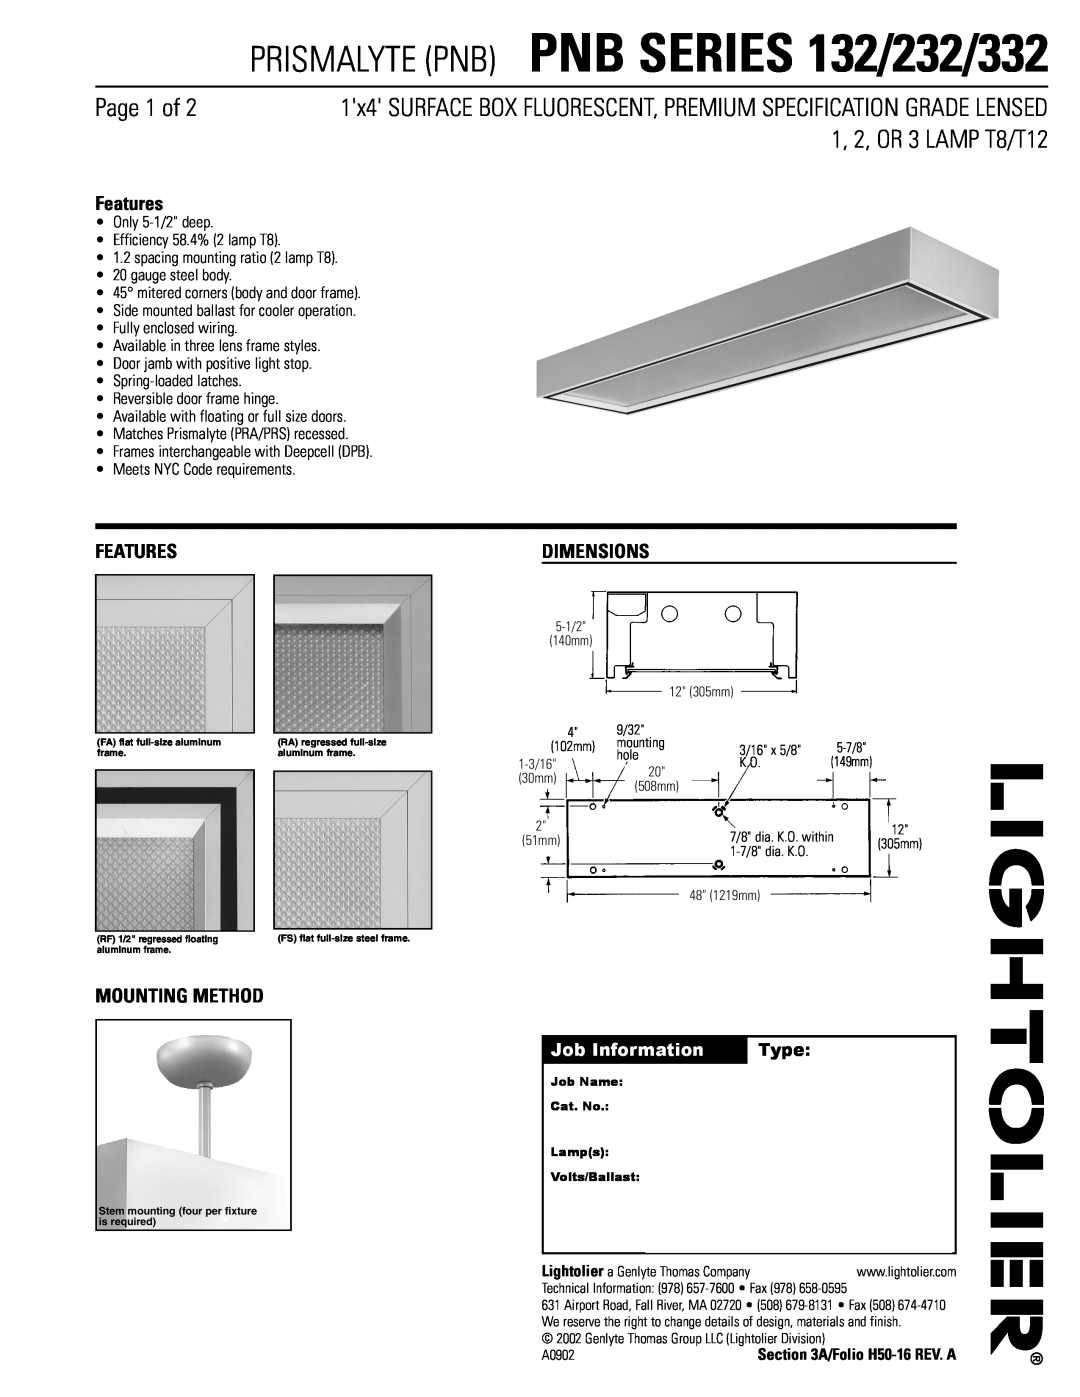 Lightolier PNB SERIES 332 dimensions PRISMALYTE PNB PNB SERIES 132/232/332, Page 1 of, 1, 2, OR 3 LAMP T8/T12, Features 